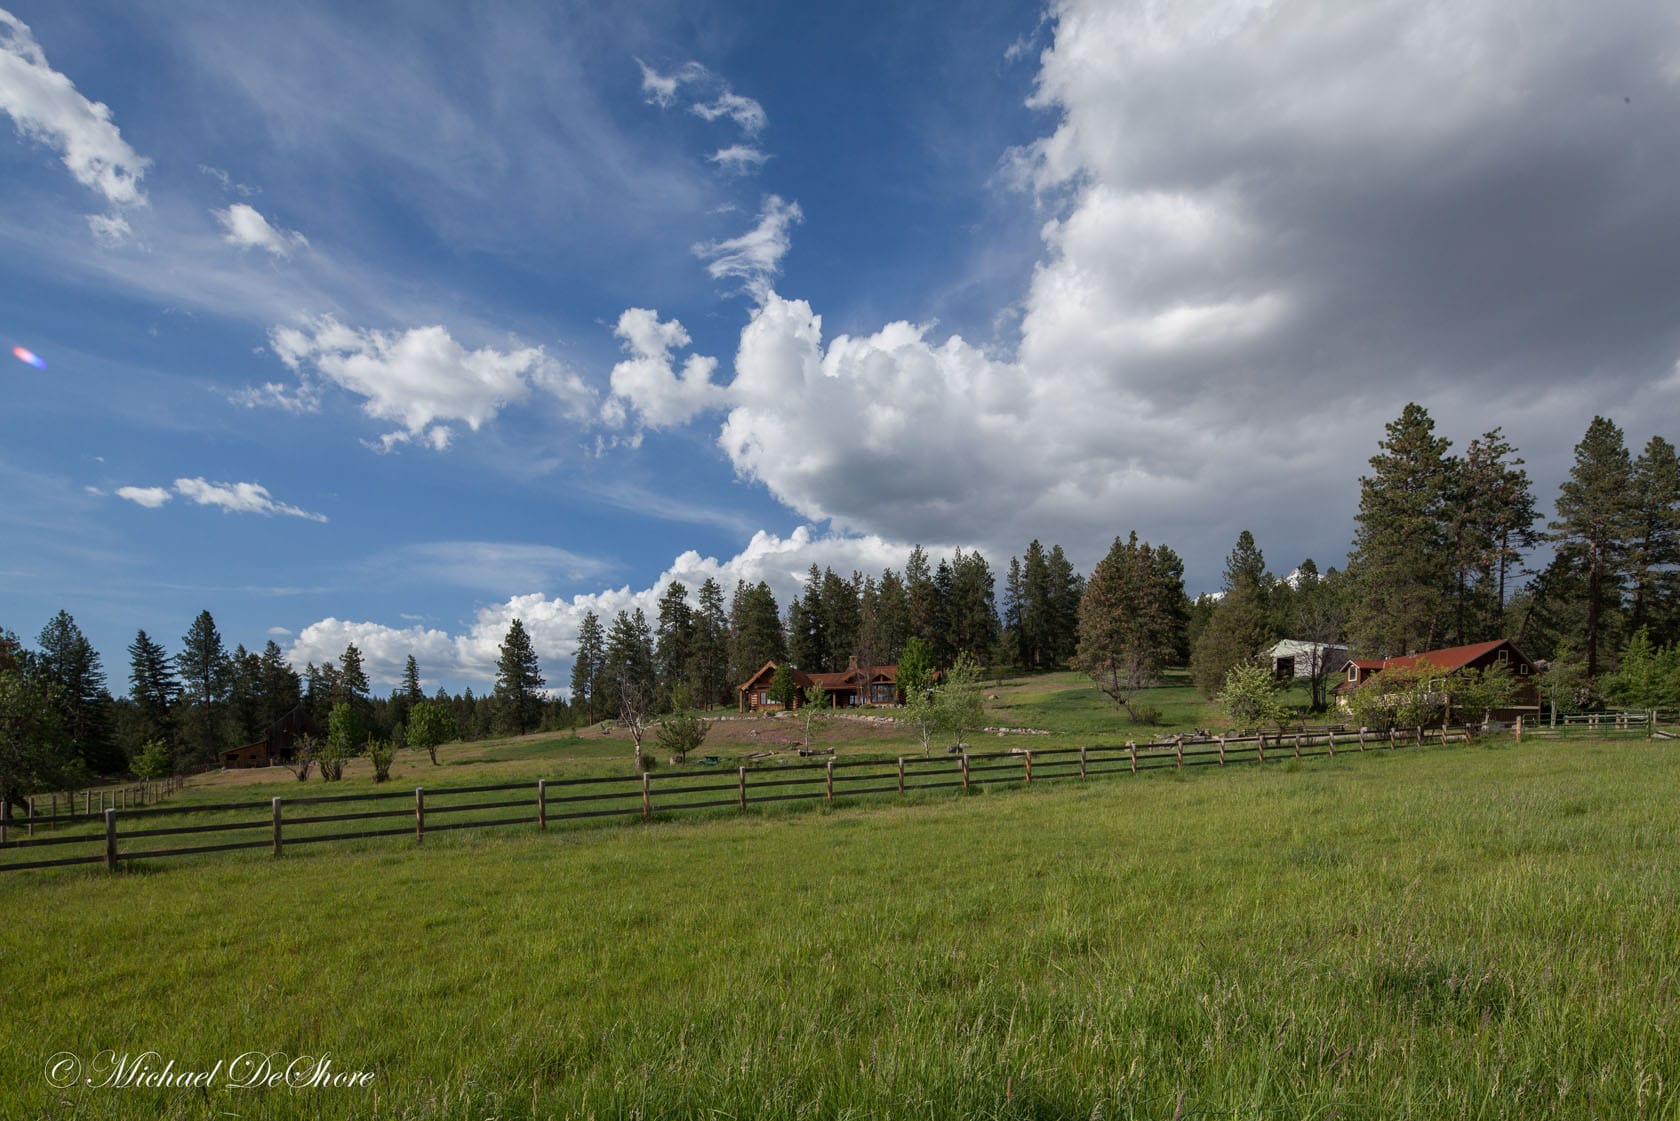 Field View Leaping Horse Farm MT Property for Sale